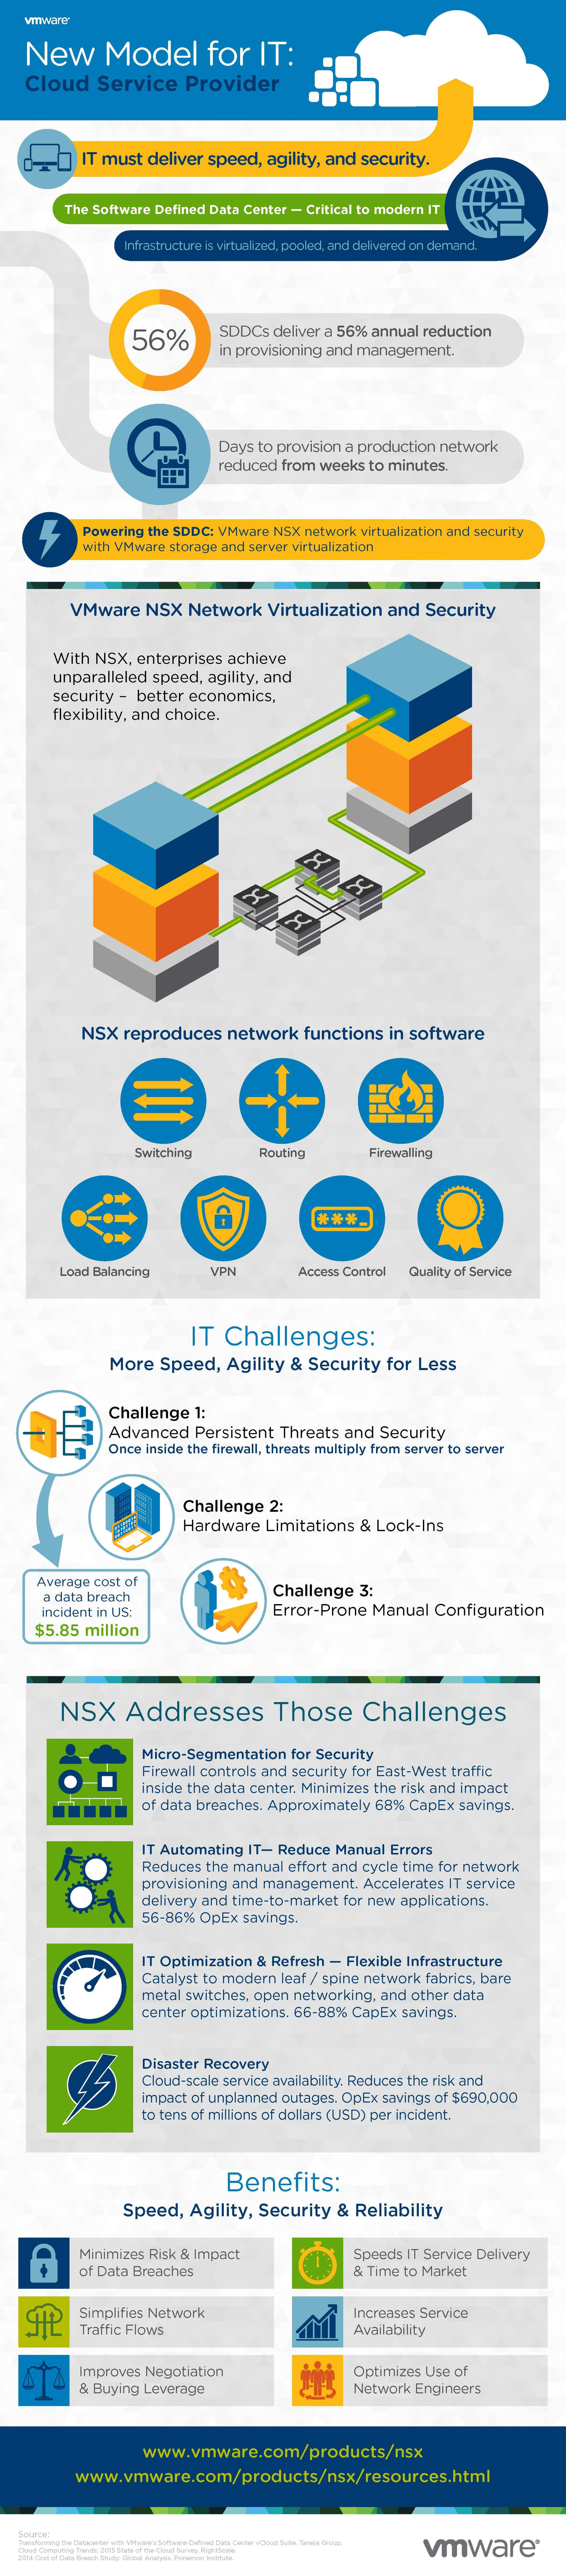 infographic displaying new model for vmware it